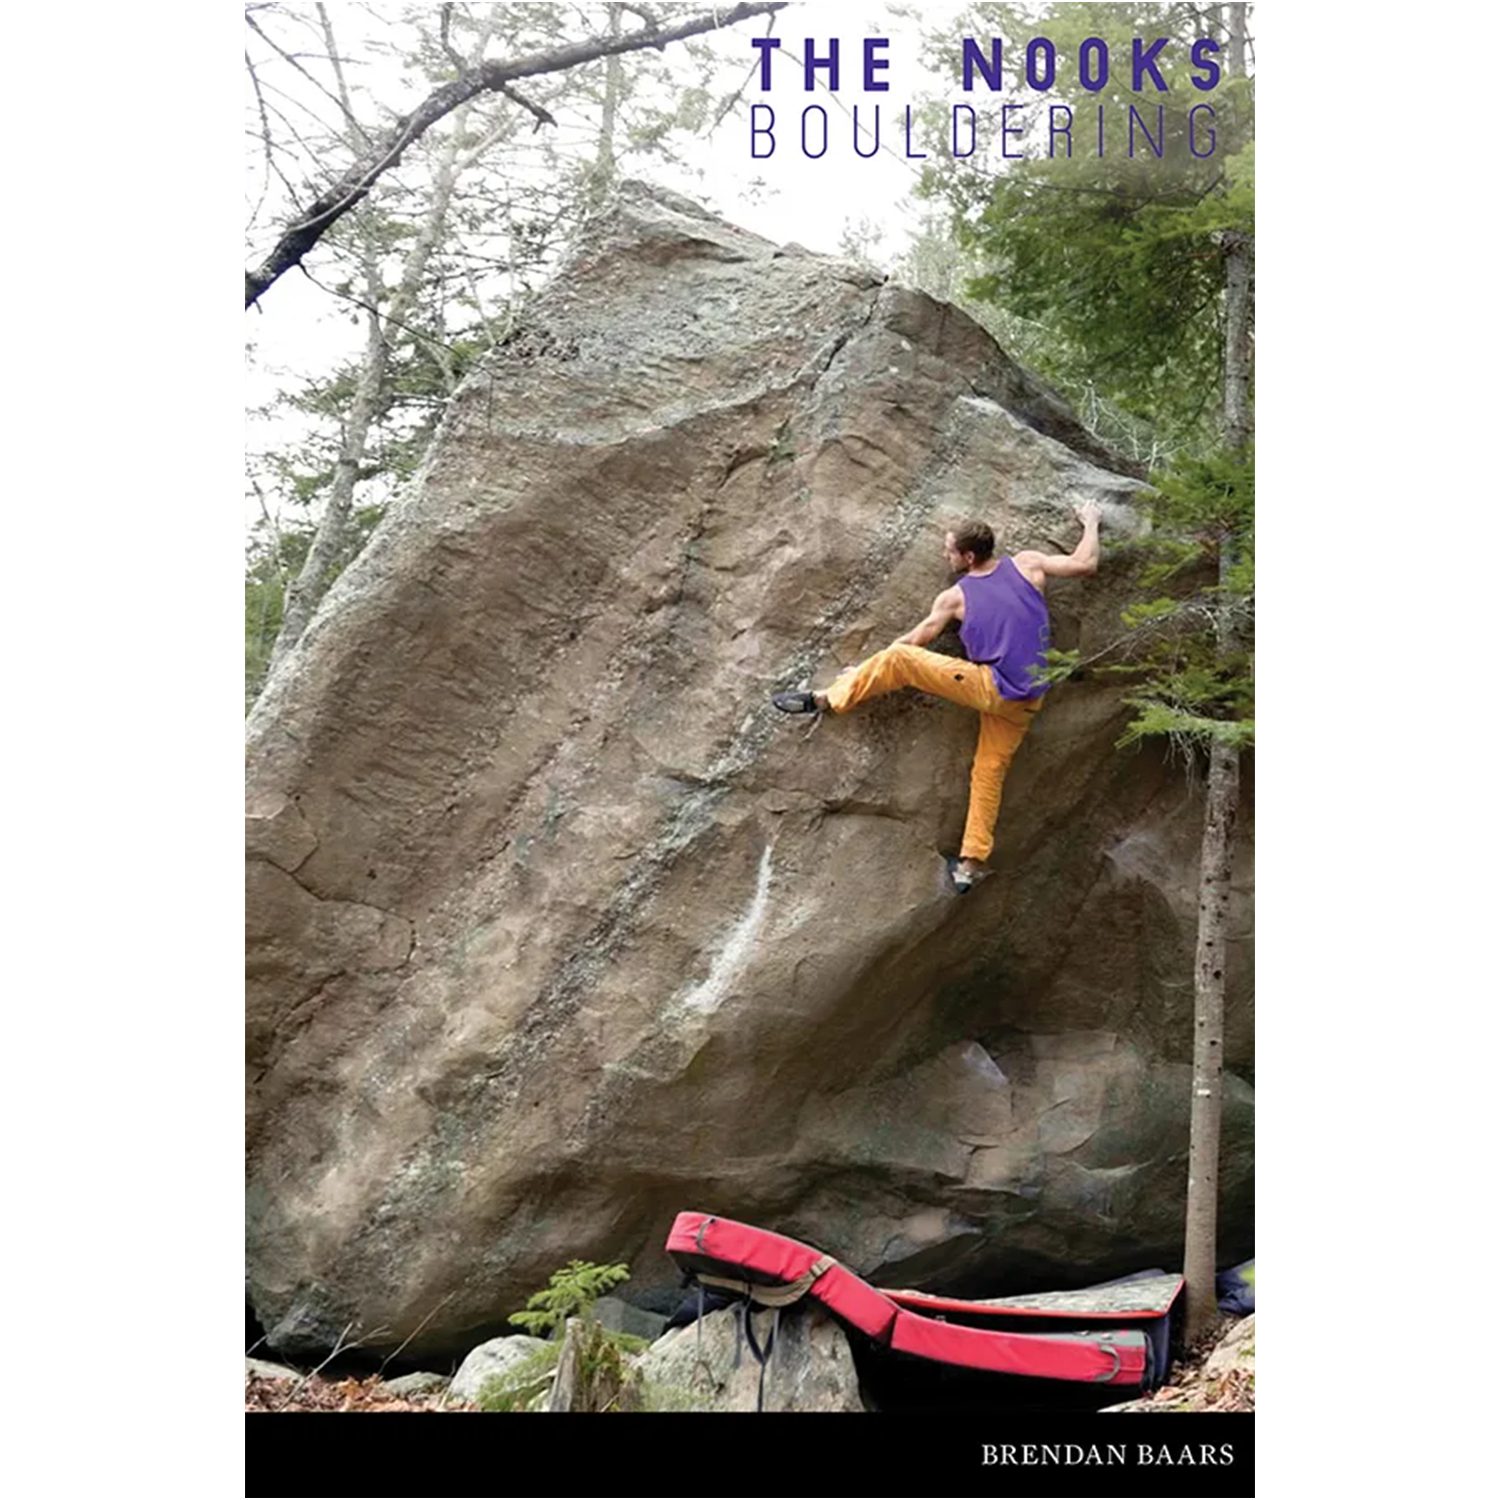 The Nooks Bouldering Guidebook